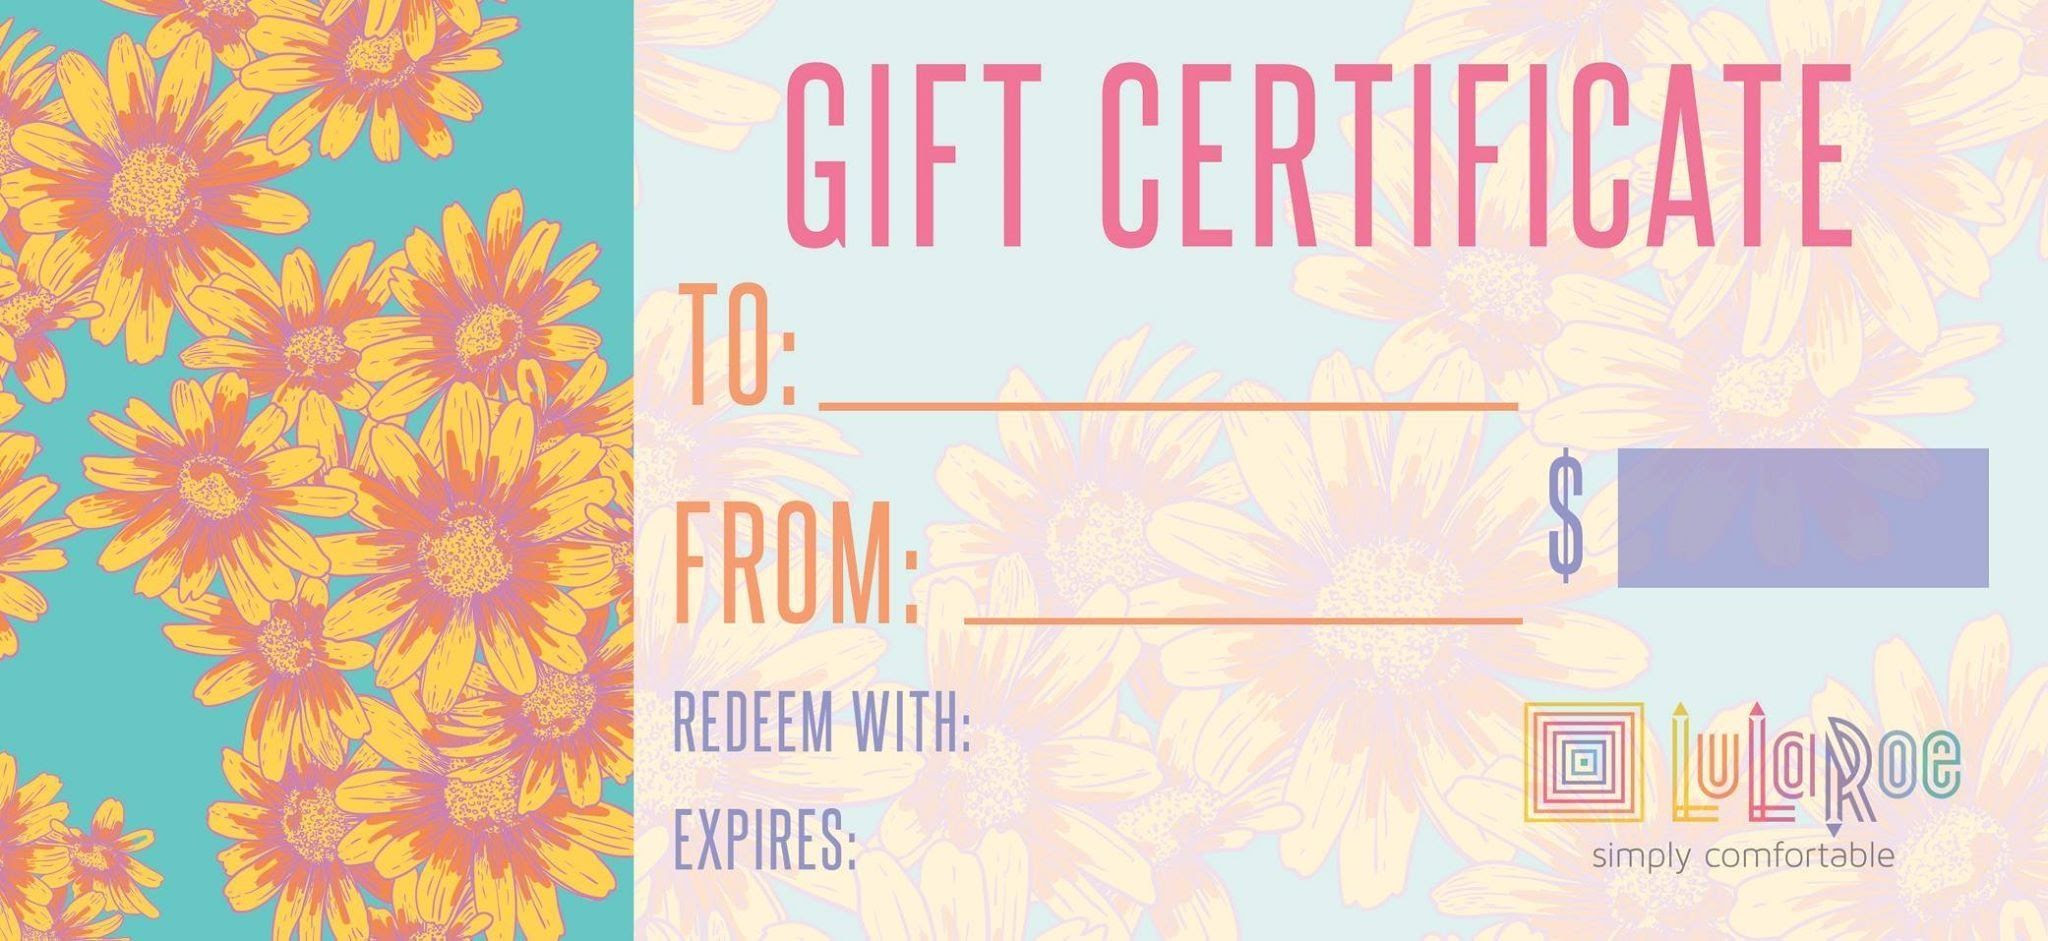 Lularoe Gift Certificate Template Free 15 Reasons Why You Shouldn't Go